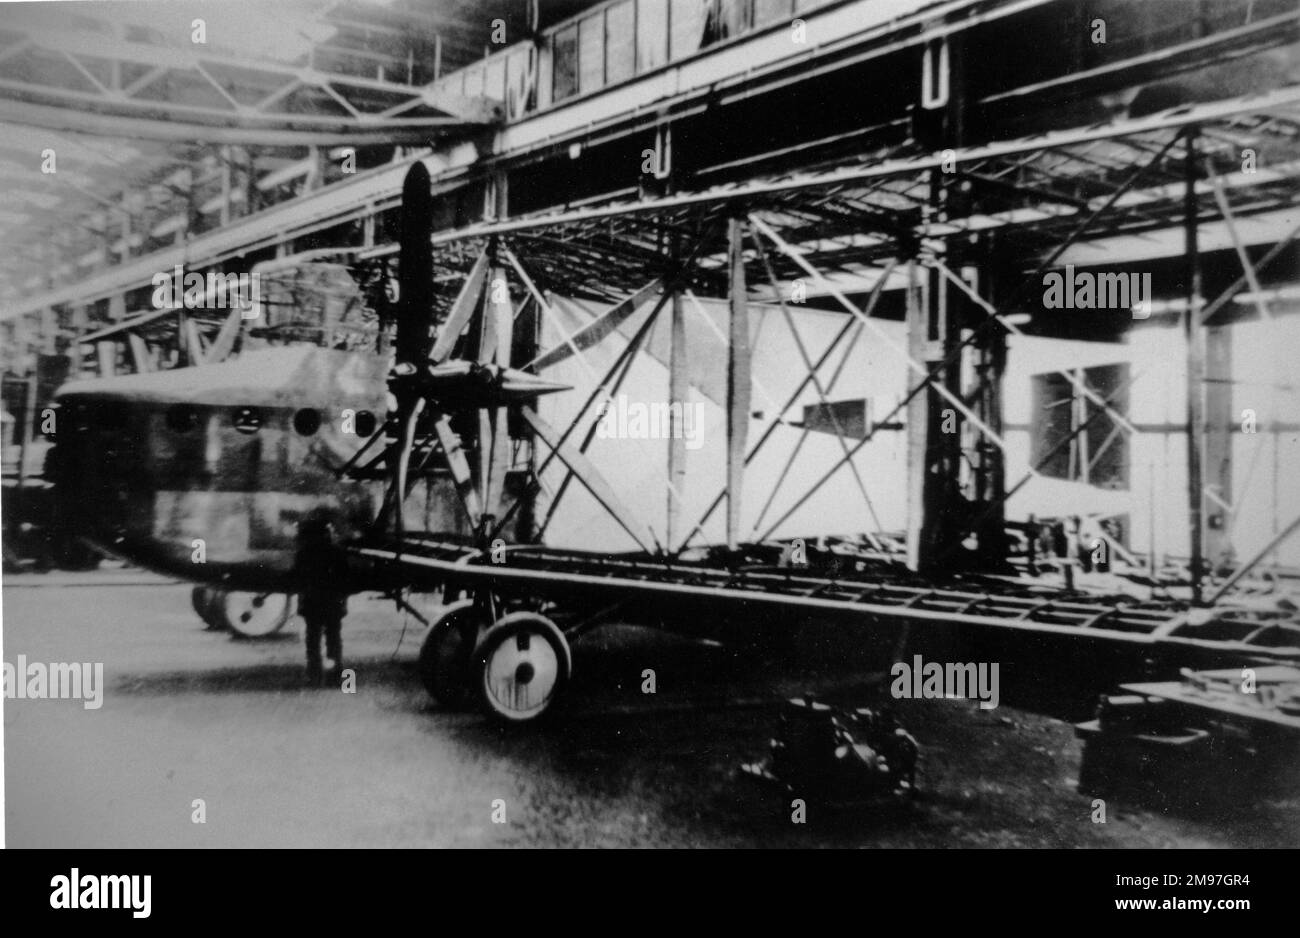 Siemens Schuckert-Werke R VI giant six-man German bomber, serial no. 6/15 (the only one made), seen here in assembly. It went into operational service on the Eastern Front in late 1916. Stock Photo